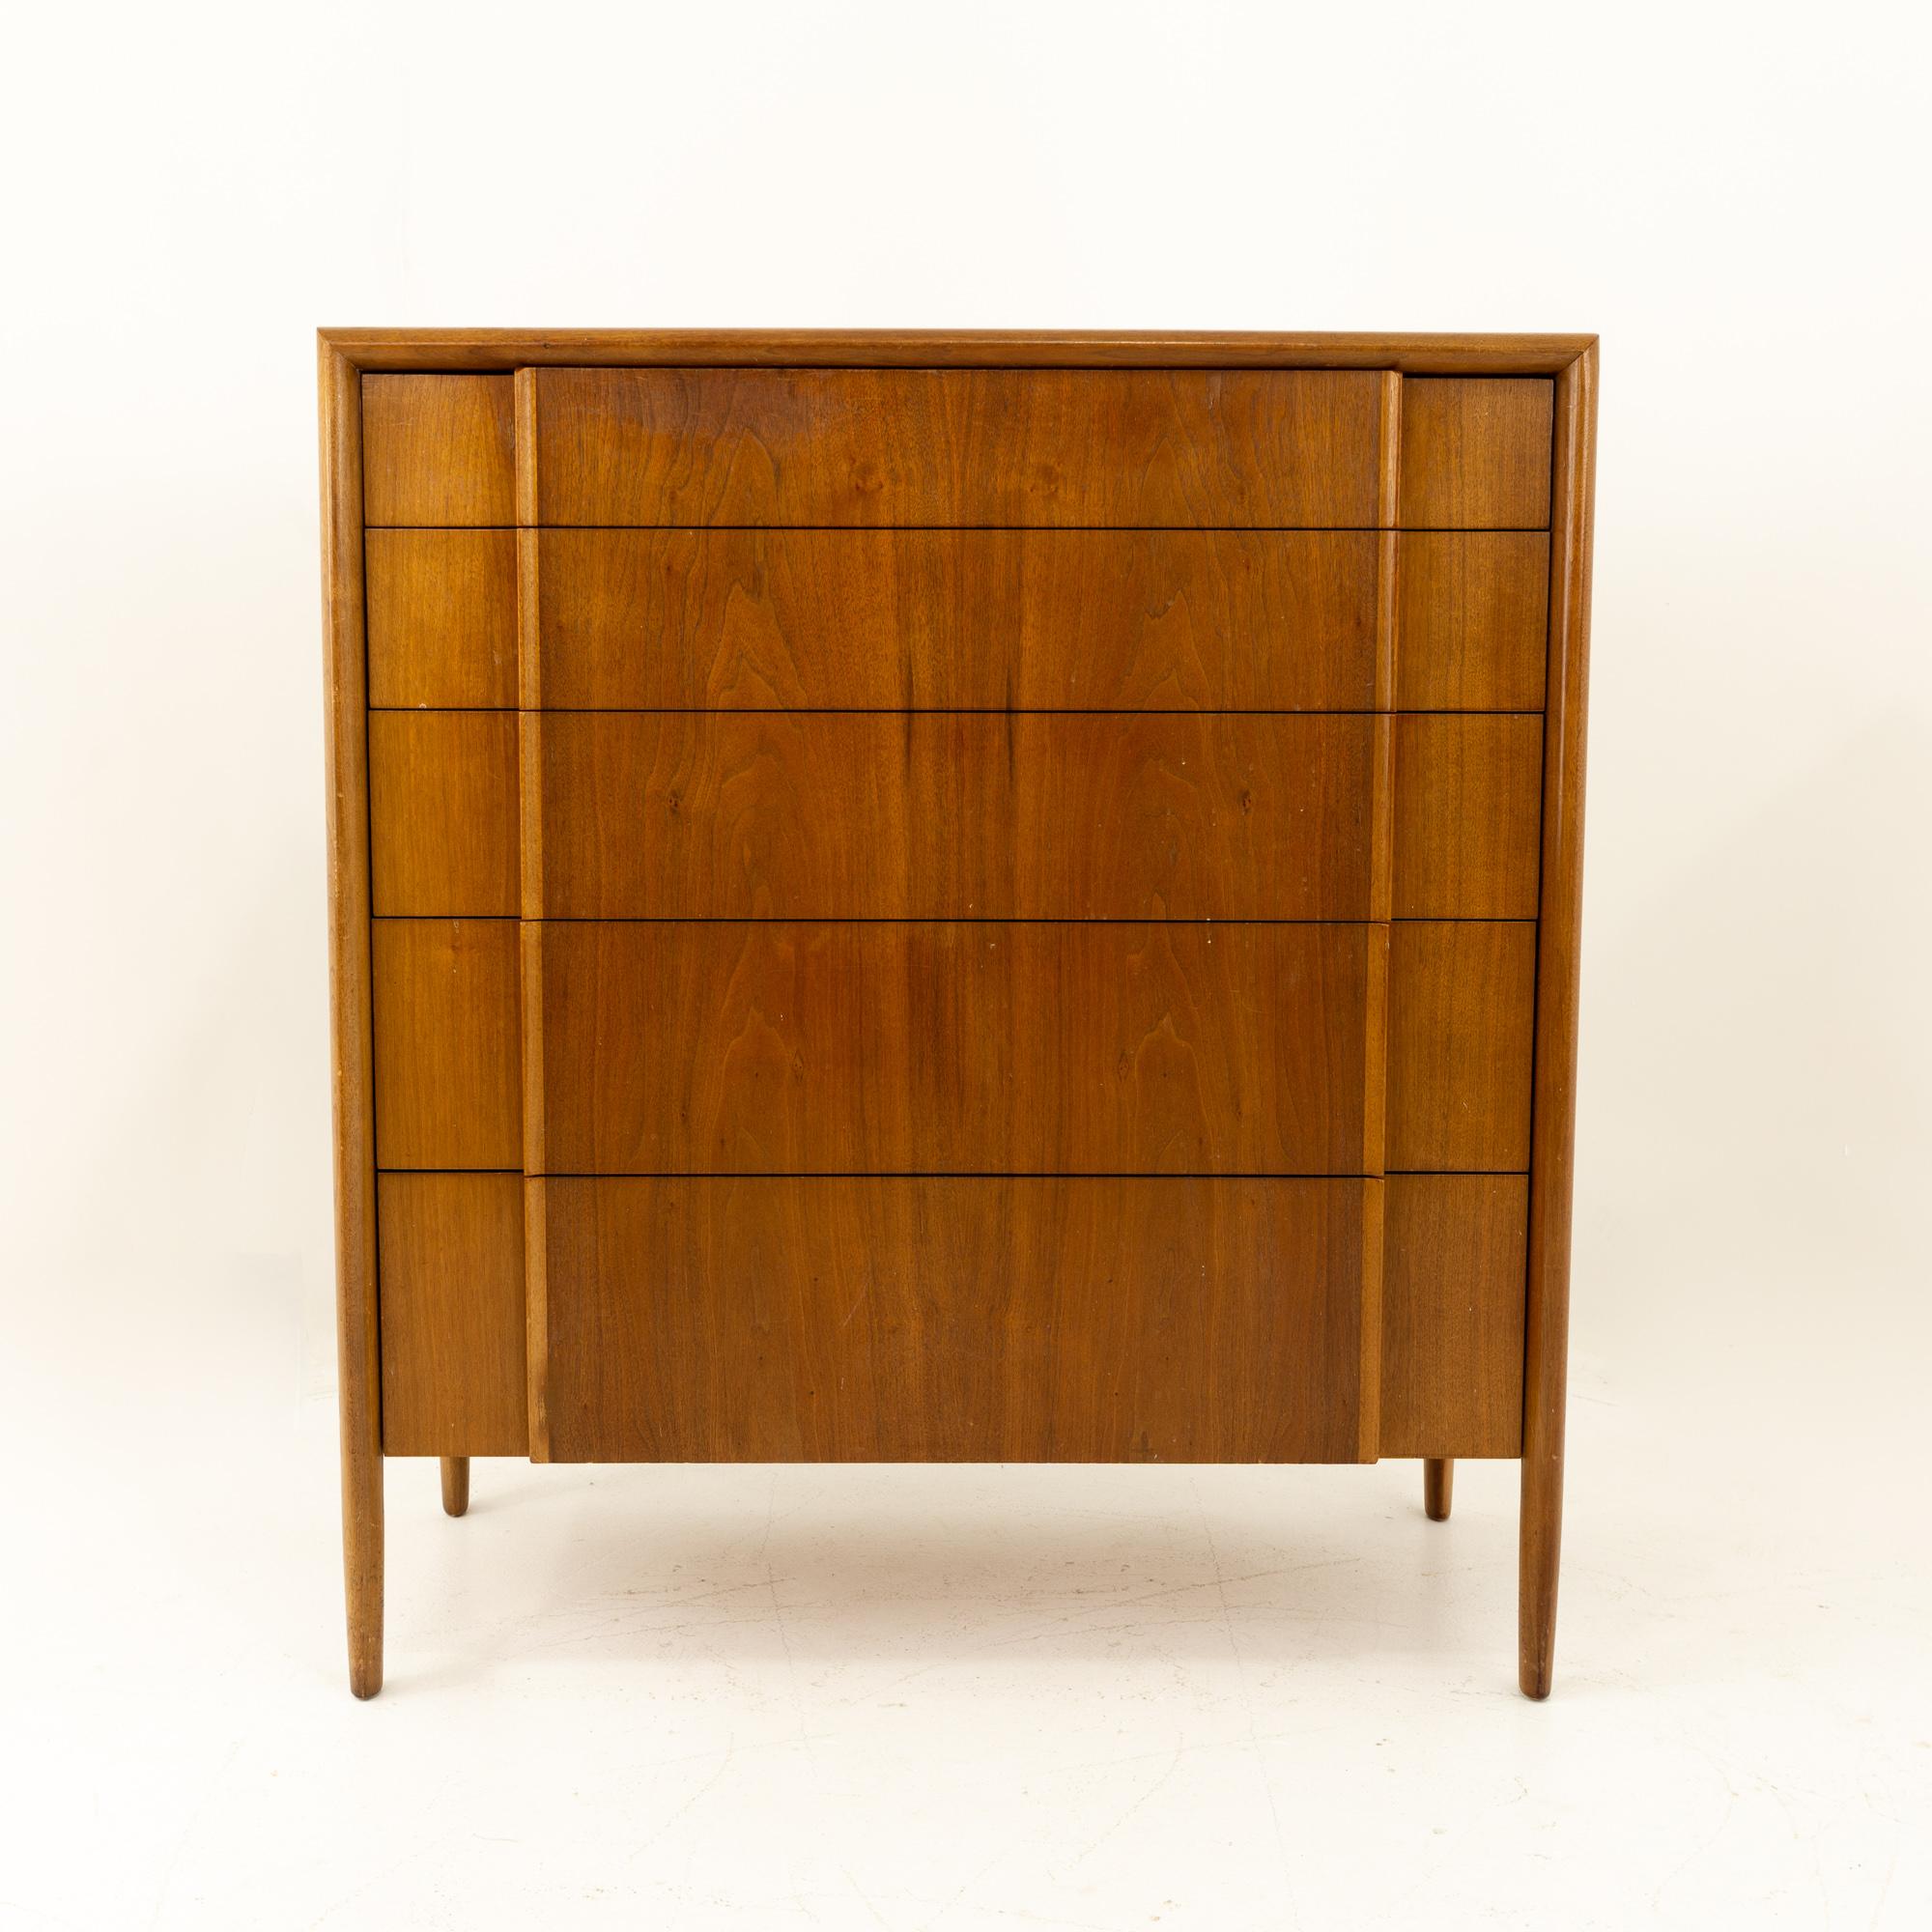 Barney Flagg for Drexel Parallel Mid Century walnut 5-drawer highboy dresser
This dresser is 39 wide and 20.5 deep by 42 inches high

All pieces of furniture can be had in what we call restored vintage condition. That means the piece is restored